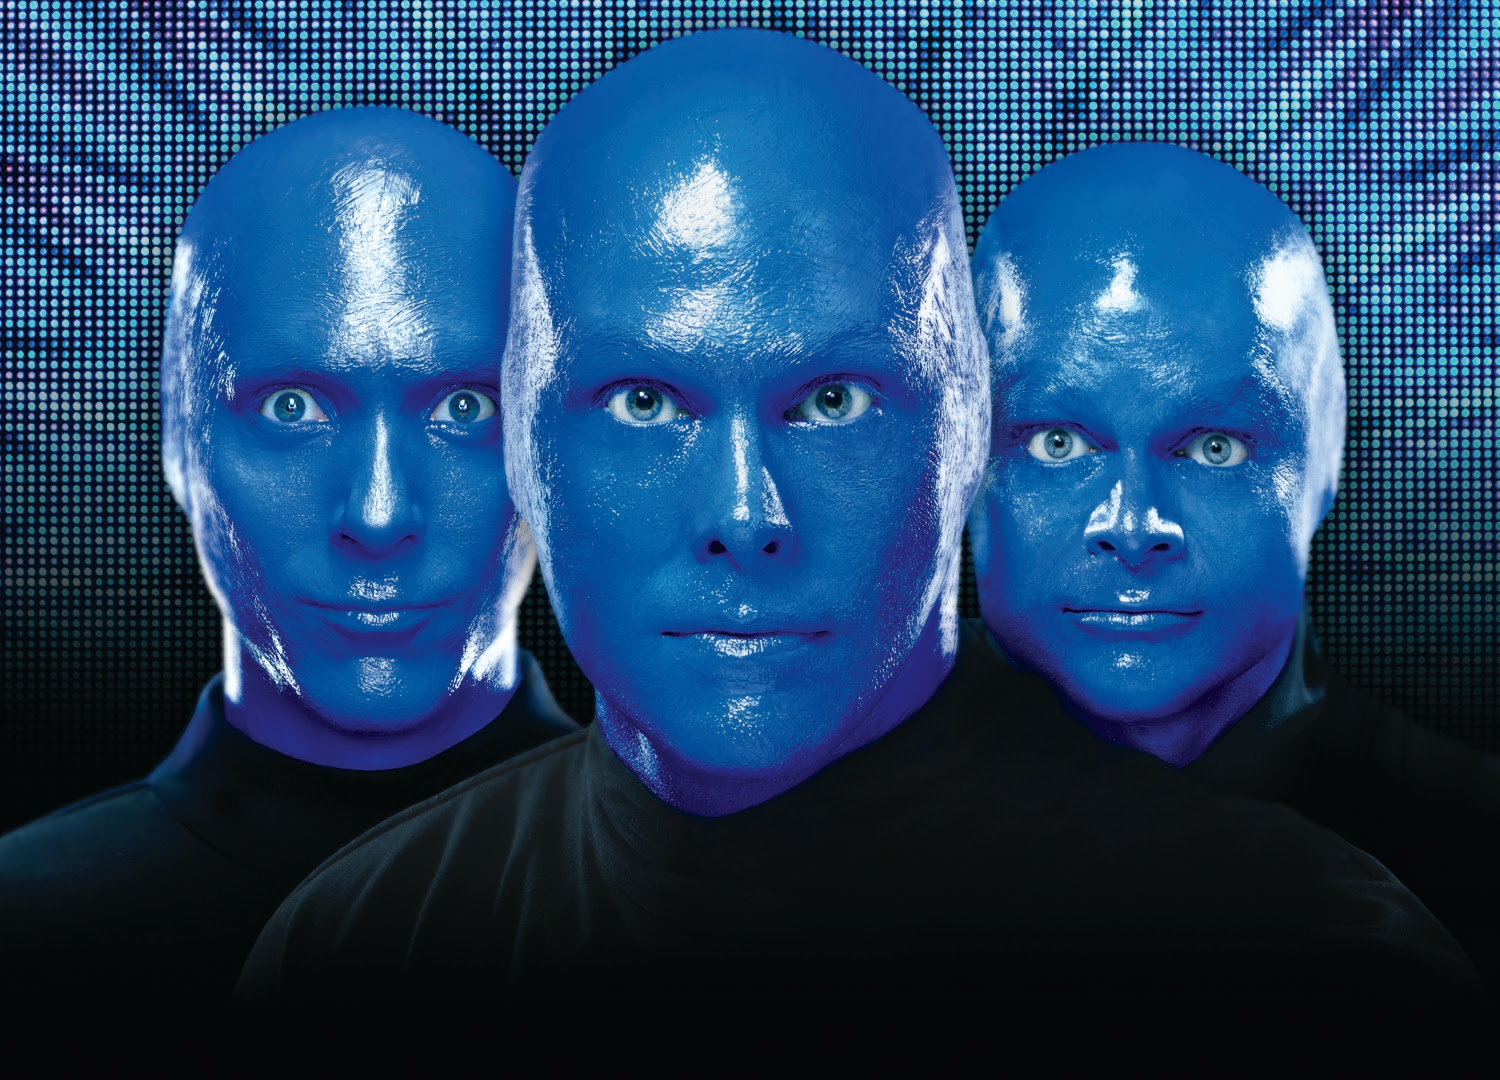 BLUE MAN GROUP ANNOUNCES OPEN CASTING CALL FOR NEW BLUE MEN AT CHICAGO’S BRIAR STREET THEATRE Casting Call to be Held Tuesday, November 11 from 10 a.m. to 4 p.m. 1